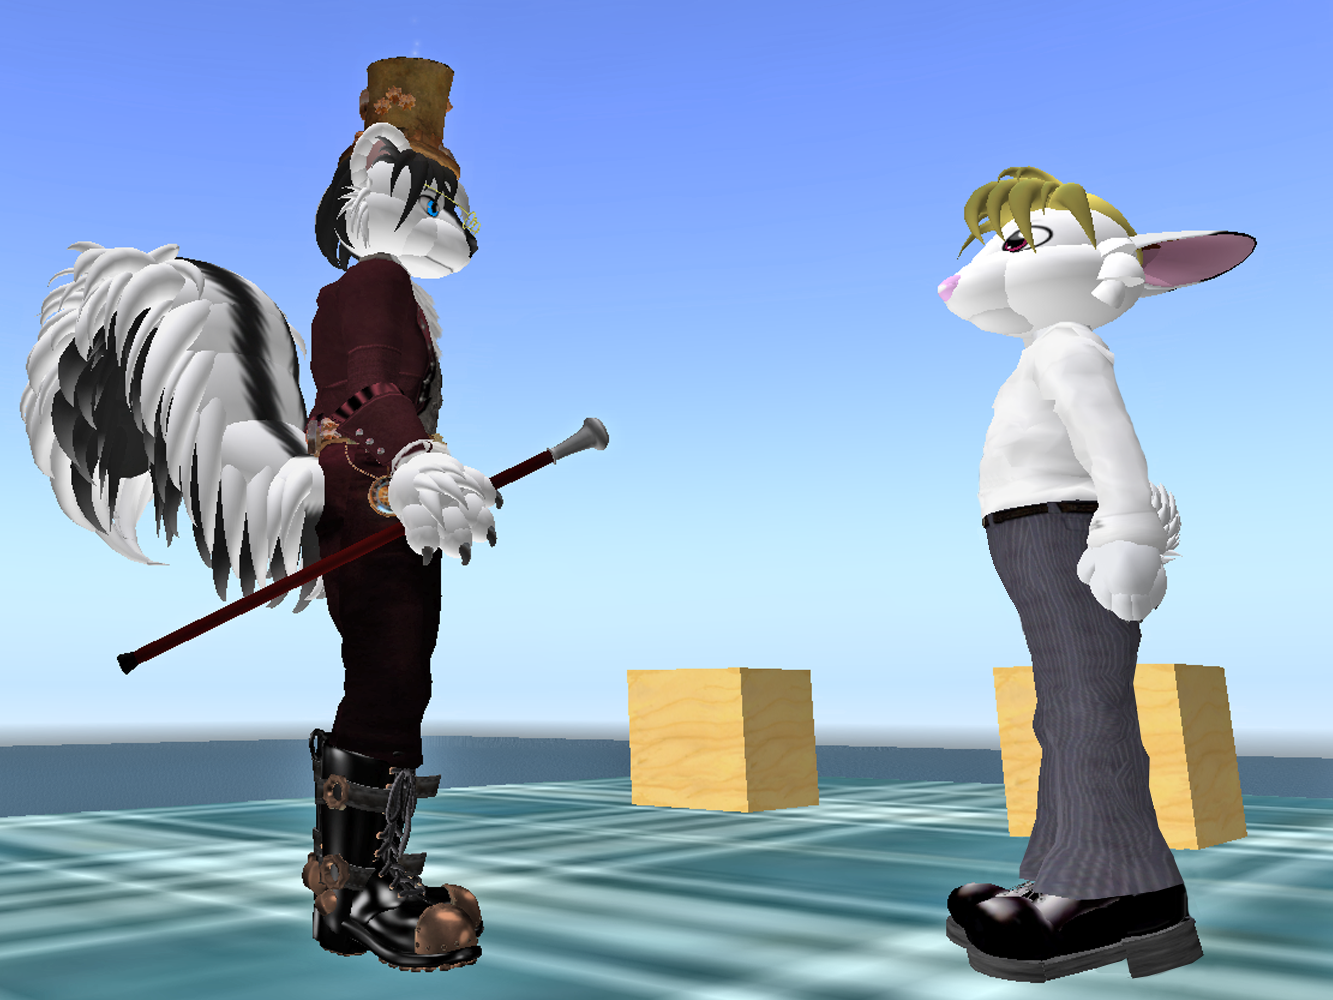 Roger at second life 4